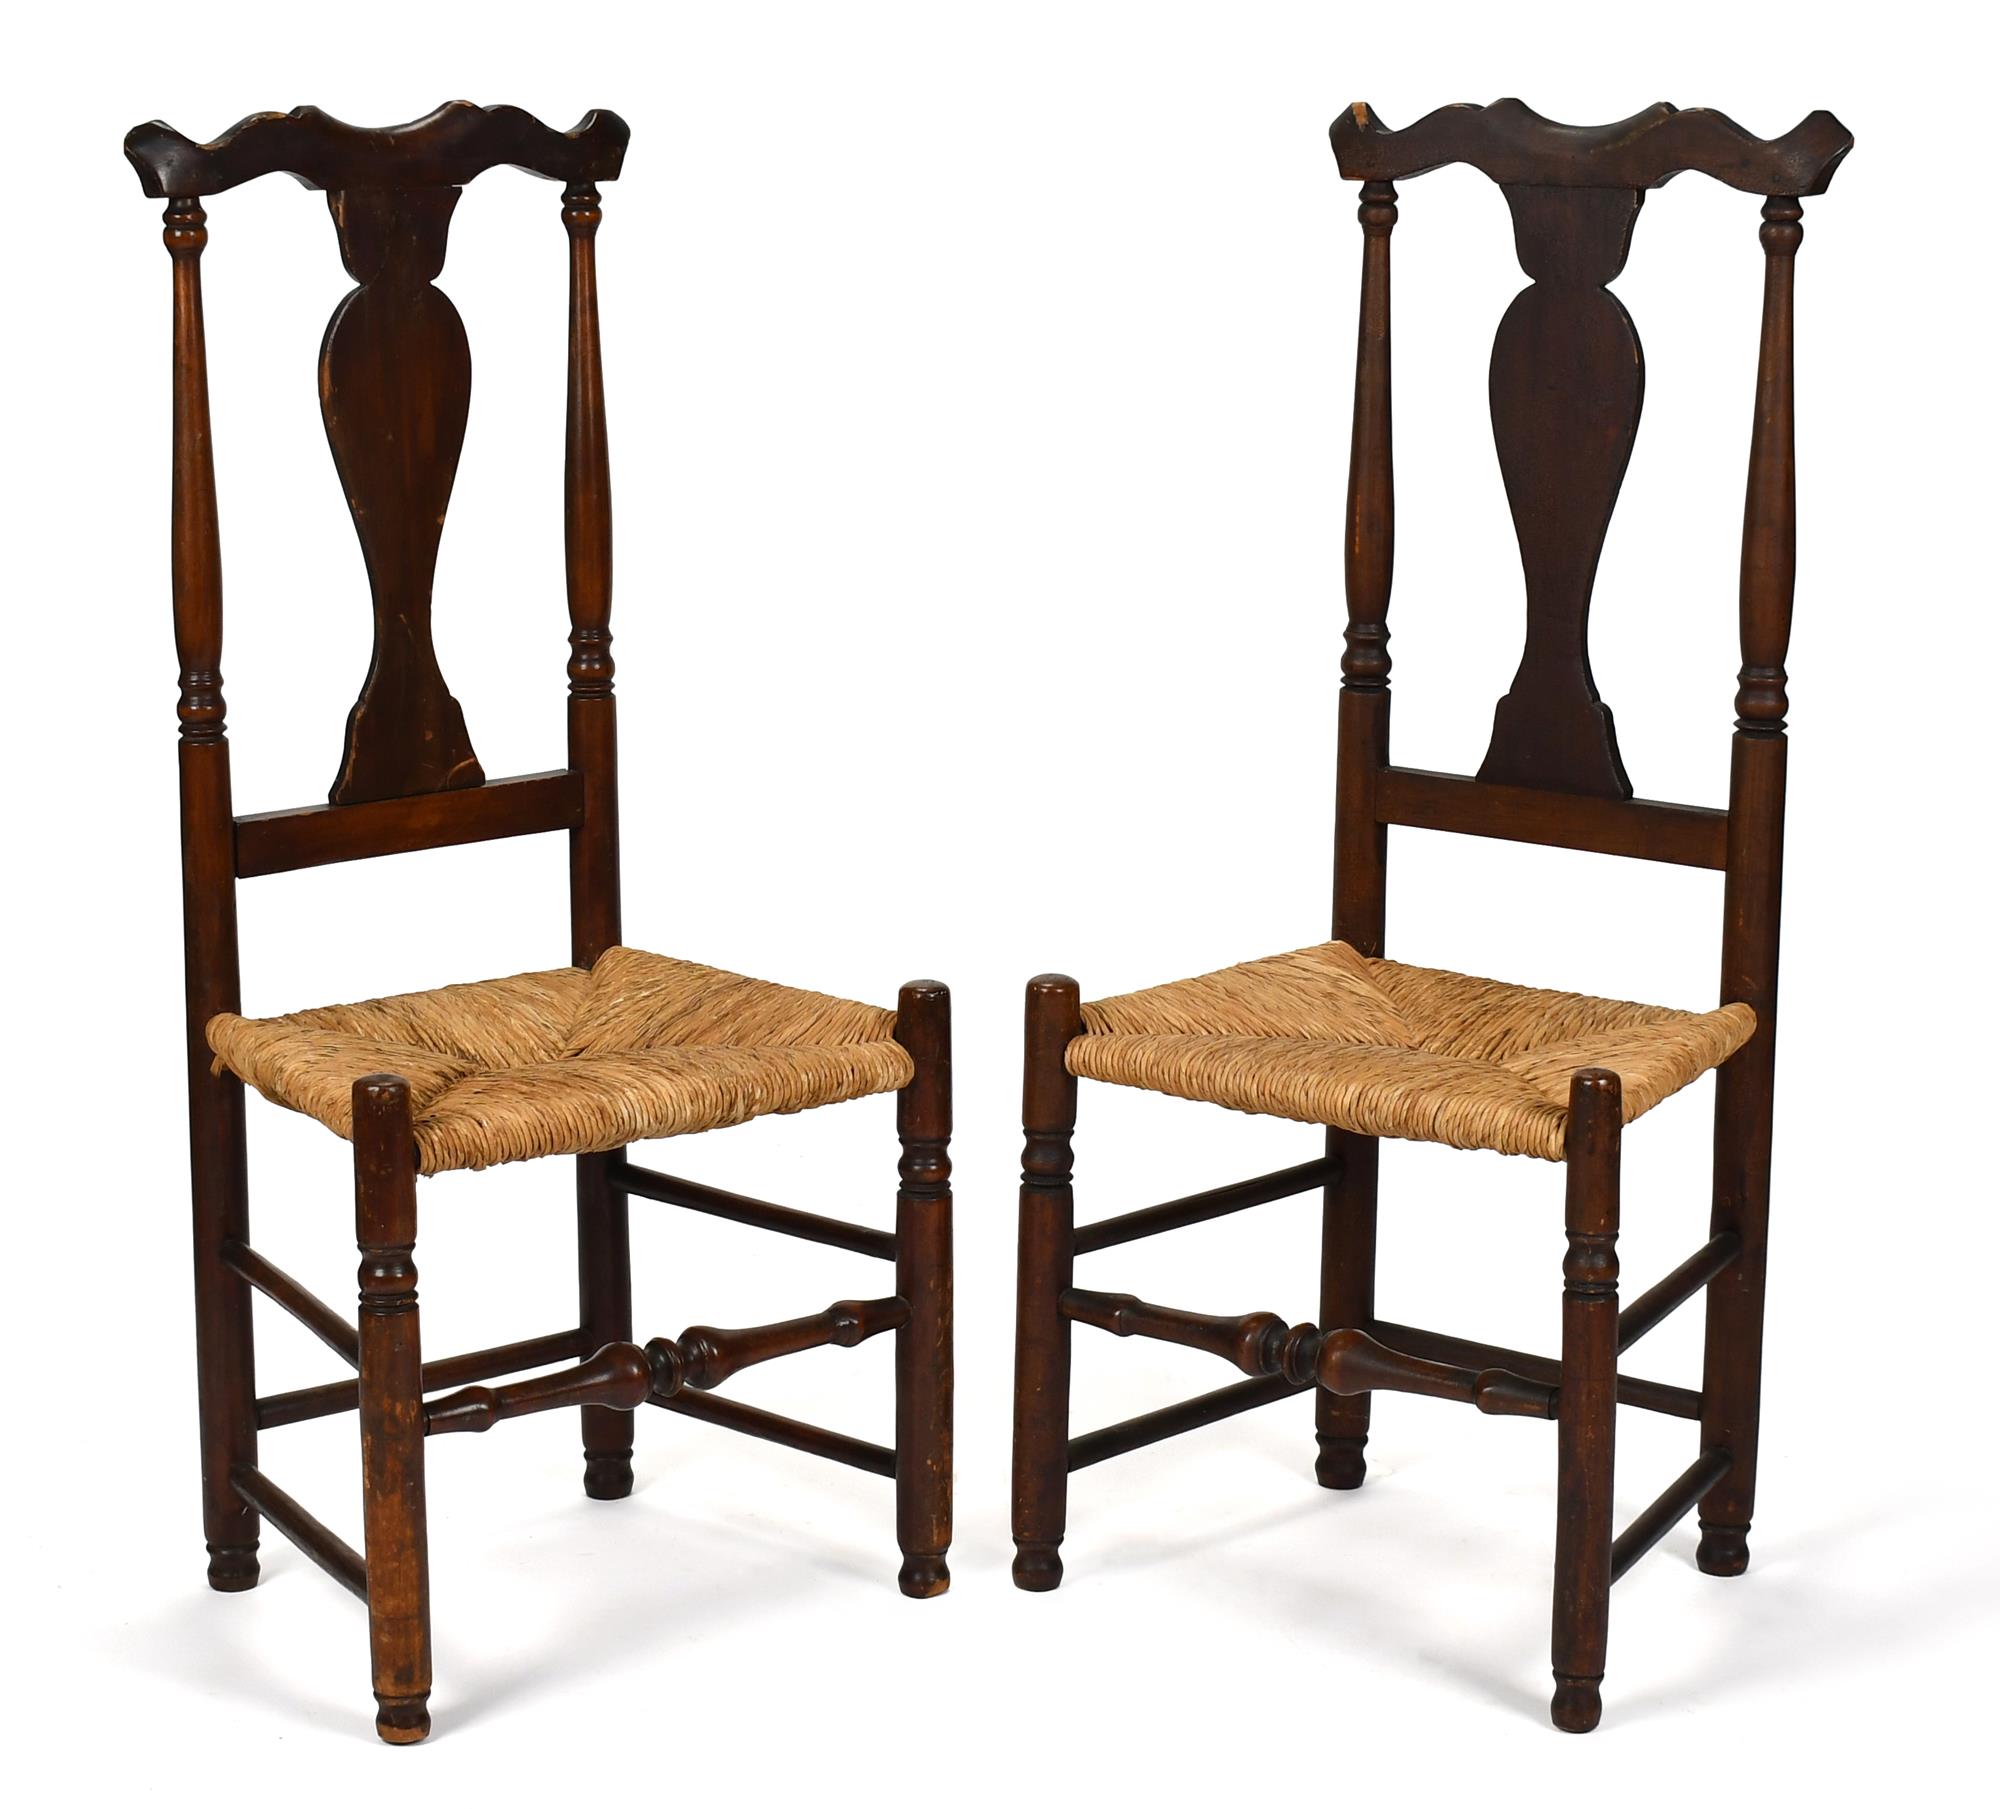 PAIR OF COUNTRY QUEEN ANNE CHAIRS,